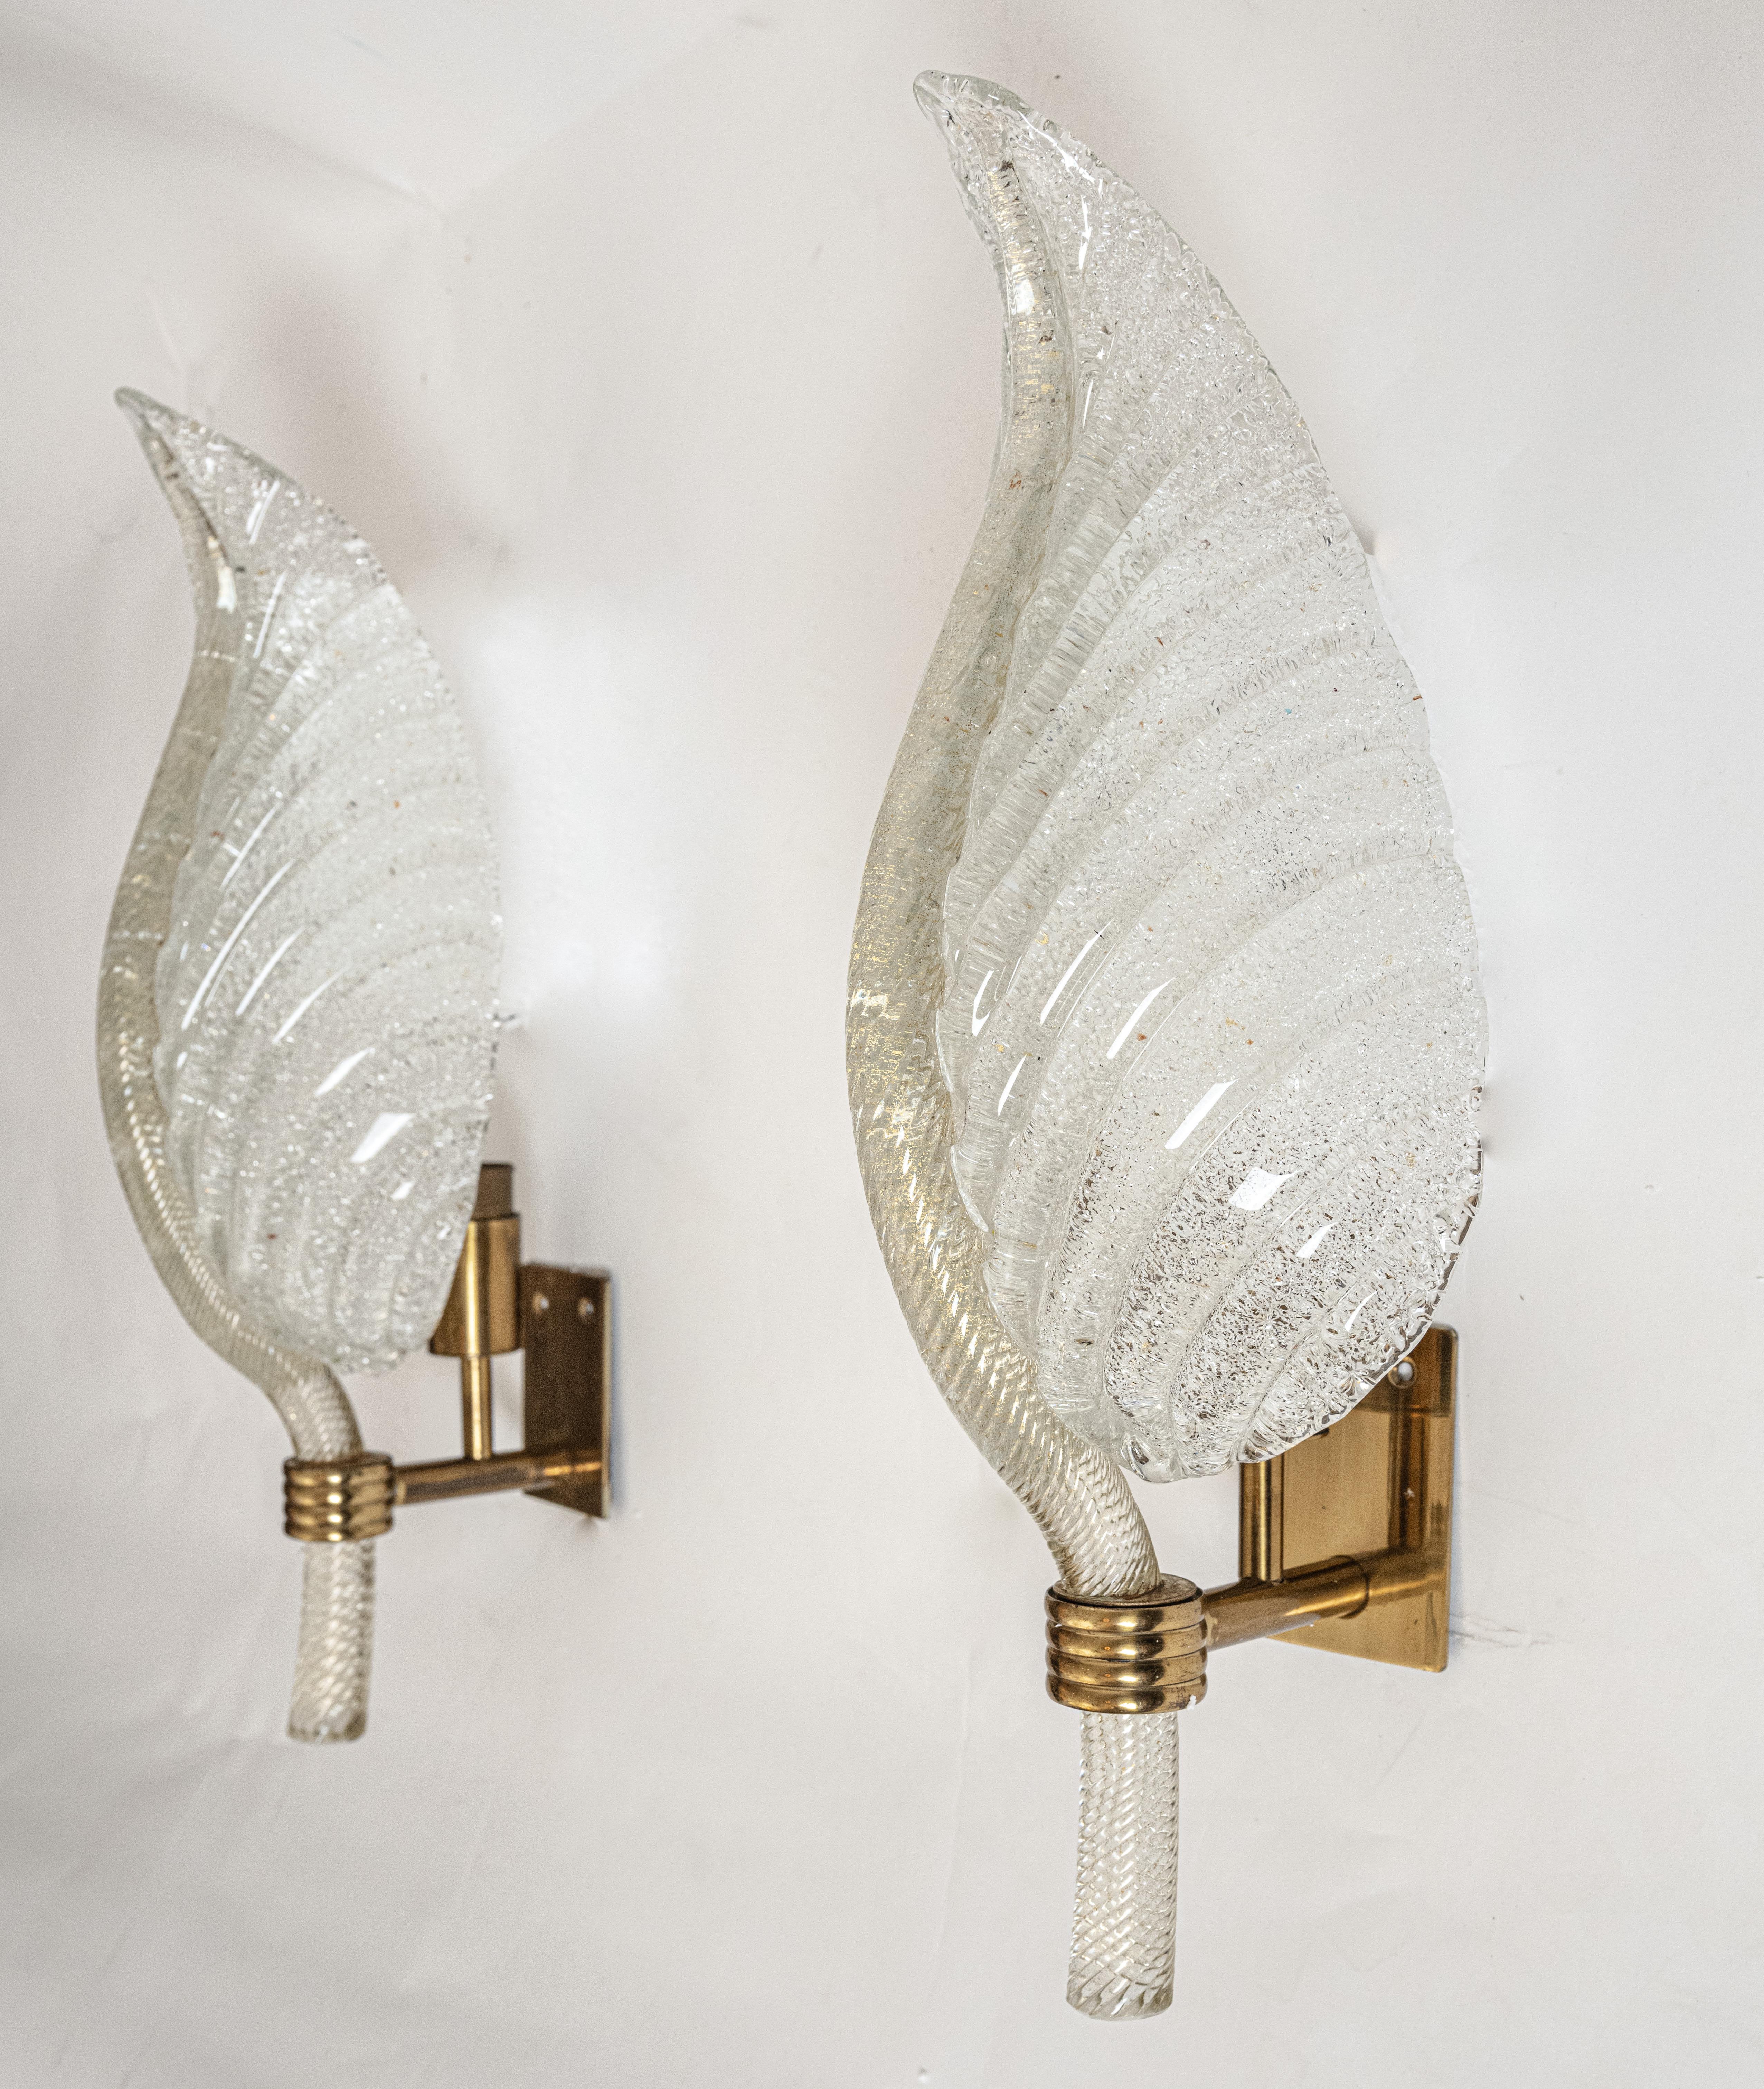 Pair of Mid Century sconces by Italian artist Ercole Barovier (1889-1974) for Barovier & Toso. With a glass shade formed into a leaf shape and having a brass backing. The oversized leaf has a spine with  gold fleck and a the ribbing features a